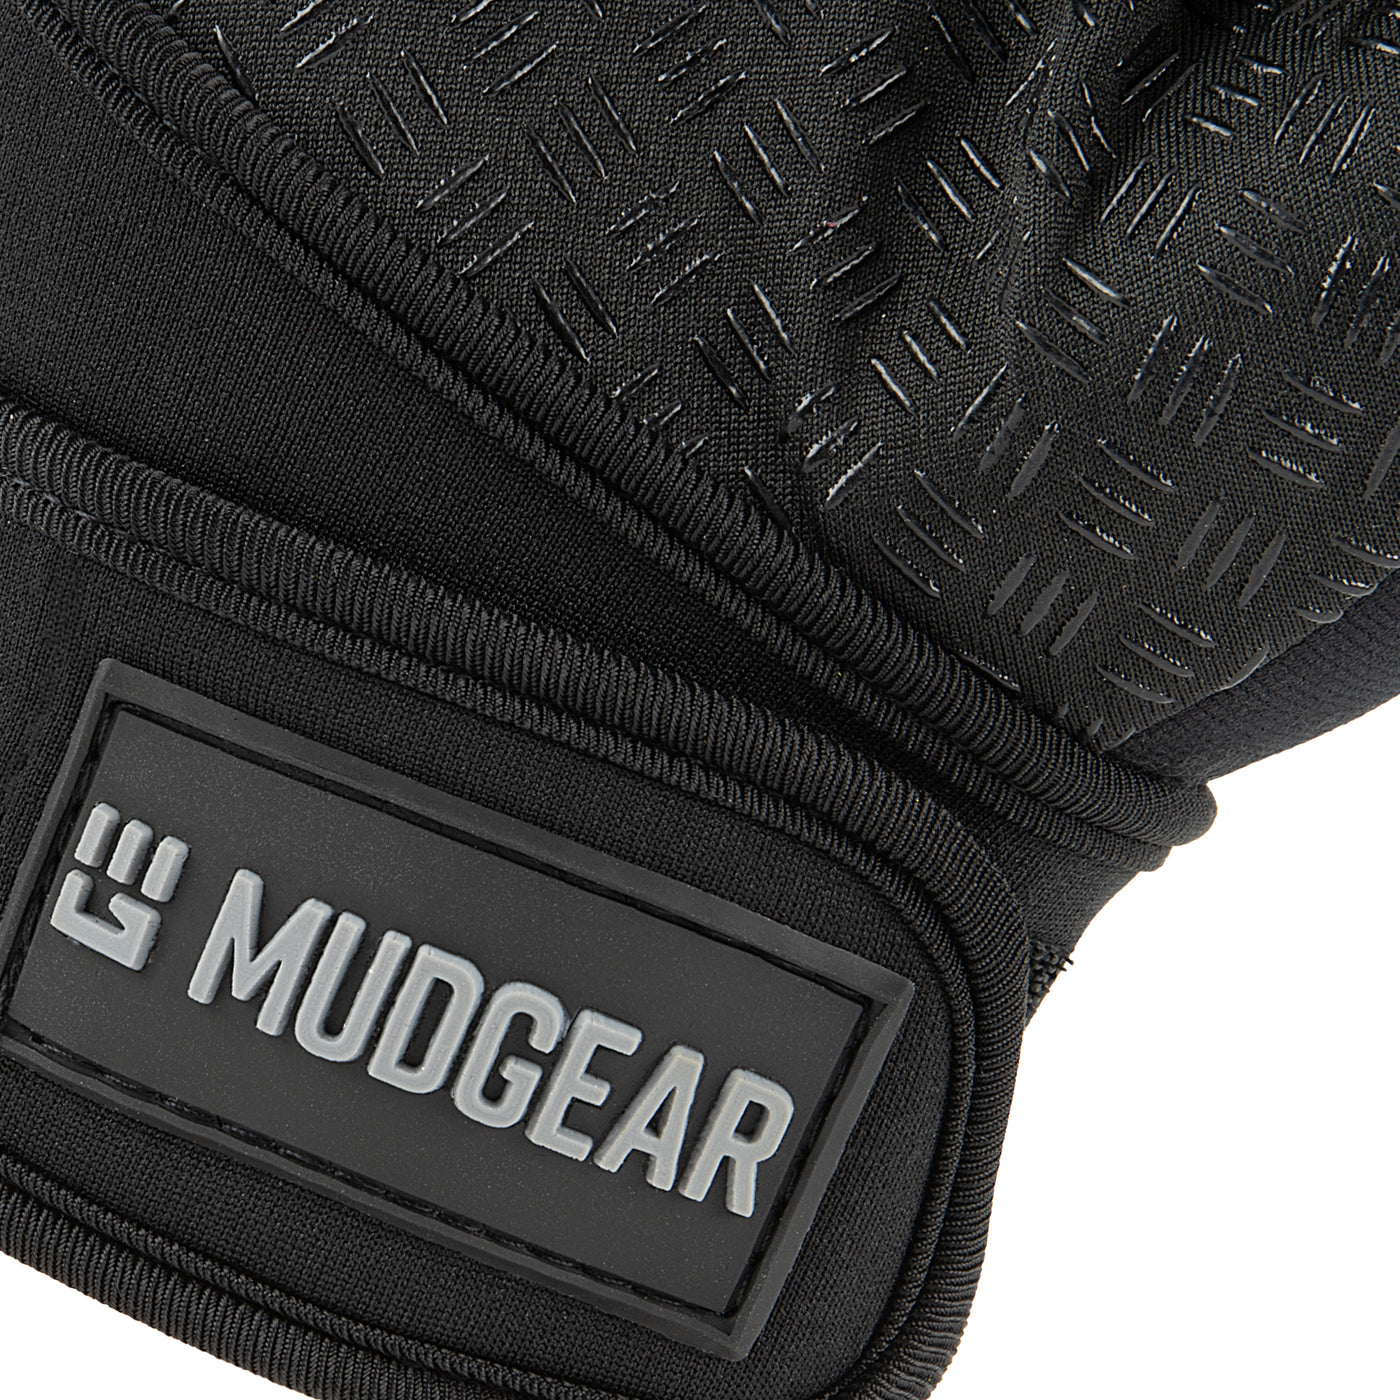 MUDGEAR OCR GLOVES - For Obstacle Course Racing, Weight Training & CrossFit